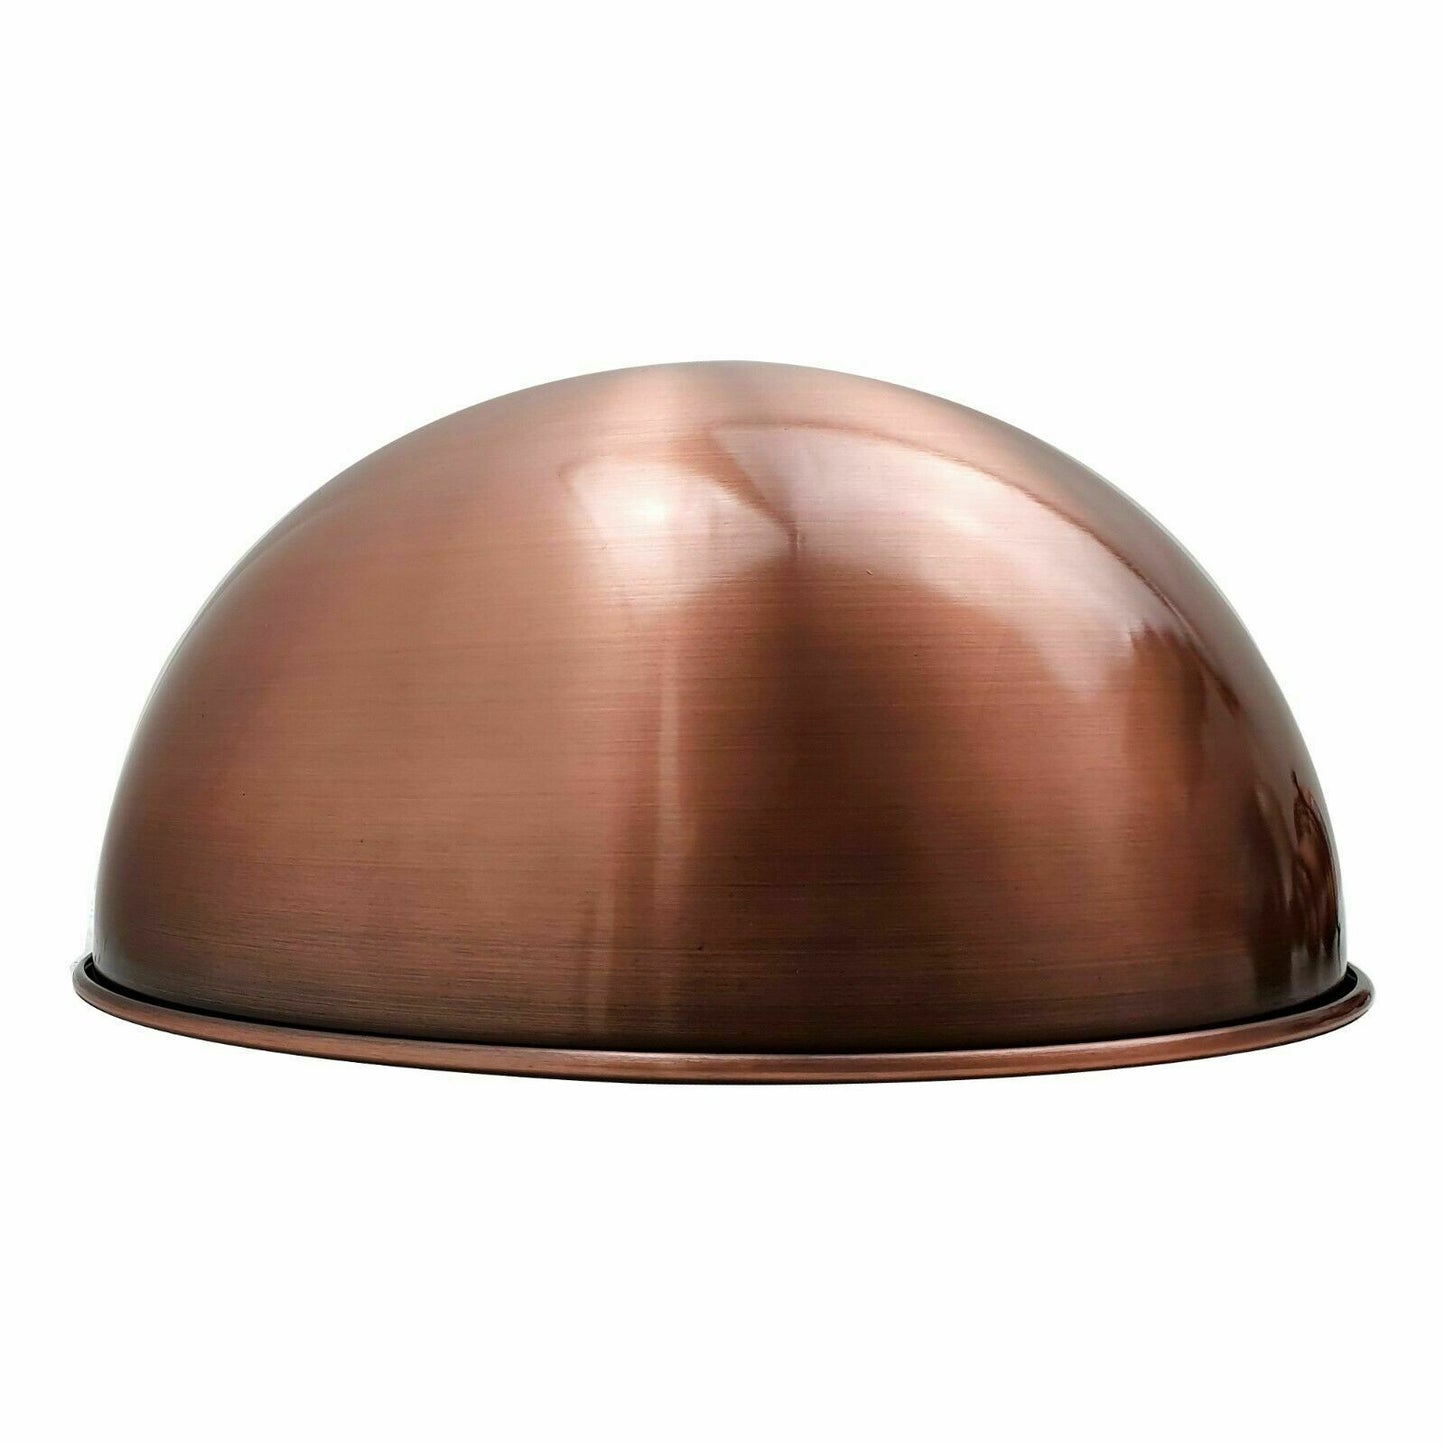 Metal Dome Vintage Cafe Easy Fit Ceiling Lampshade